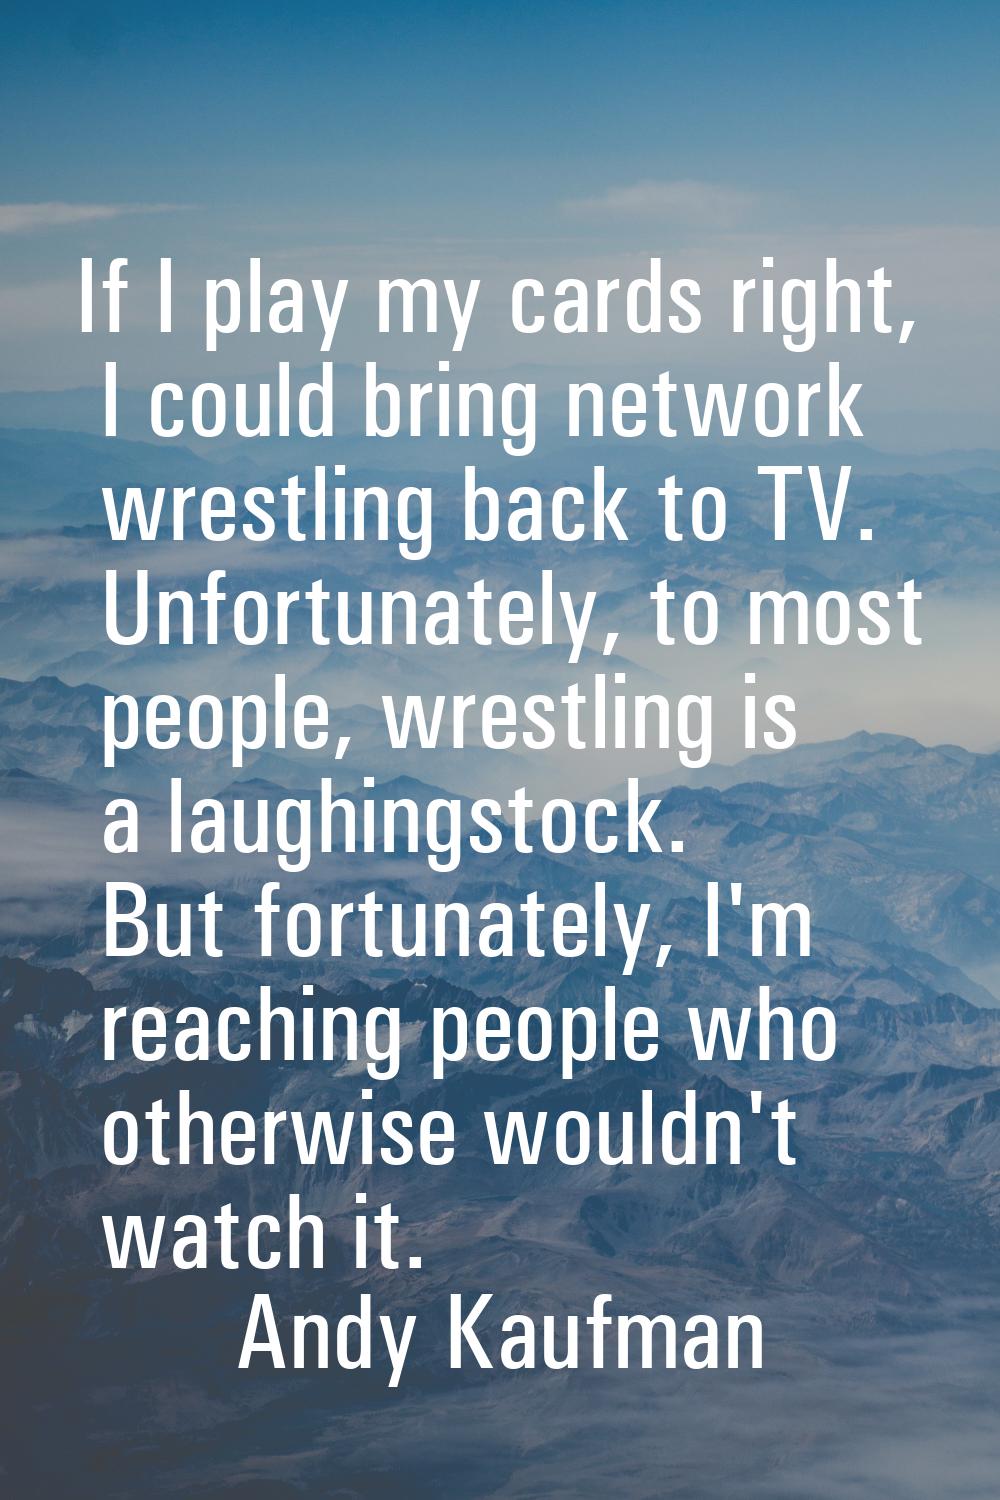 If I play my cards right, I could bring network wrestling back to TV. Unfortunately, to most people